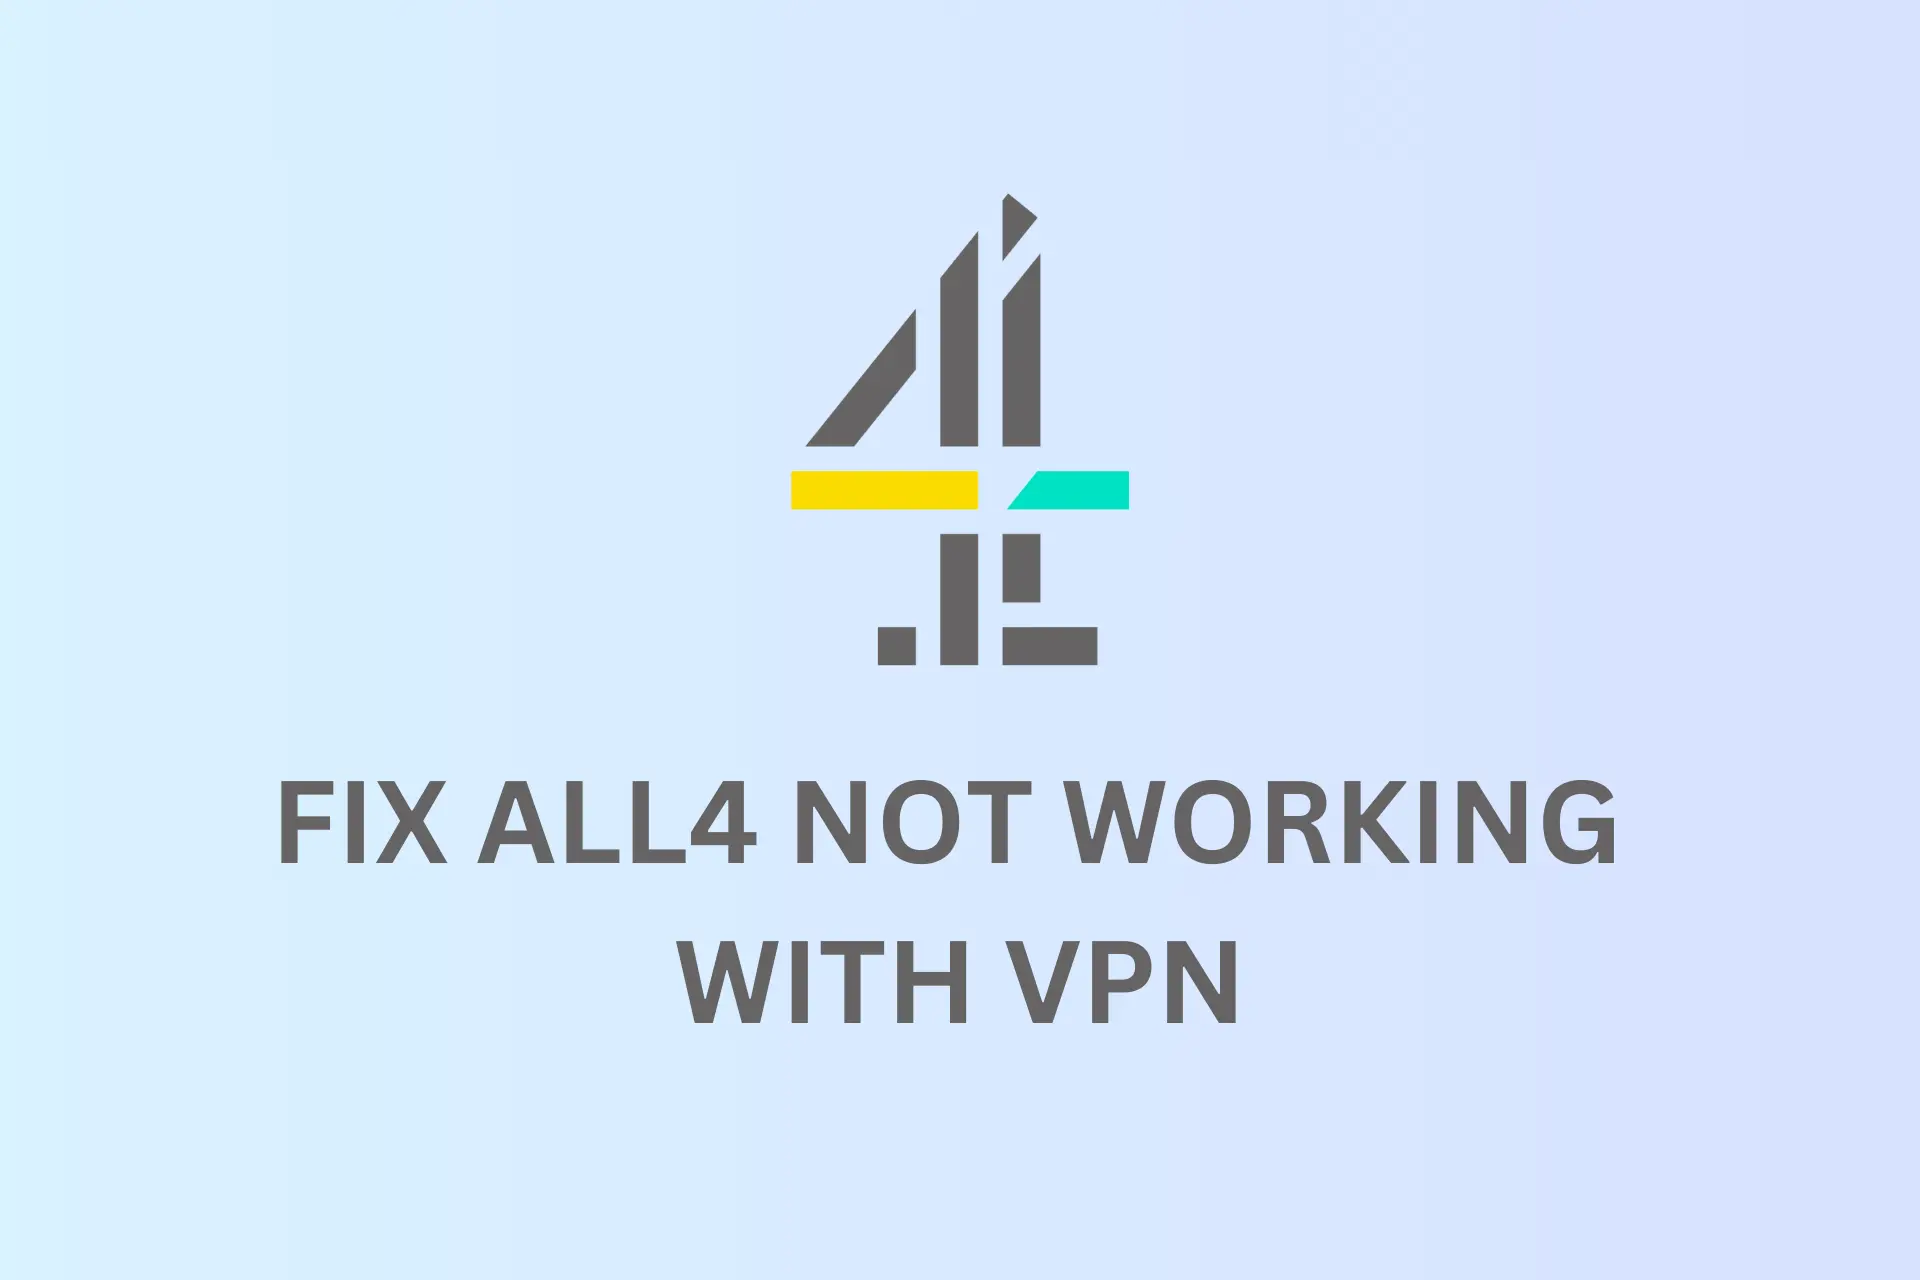 ALL 4 NOT WORKING WITH VPN